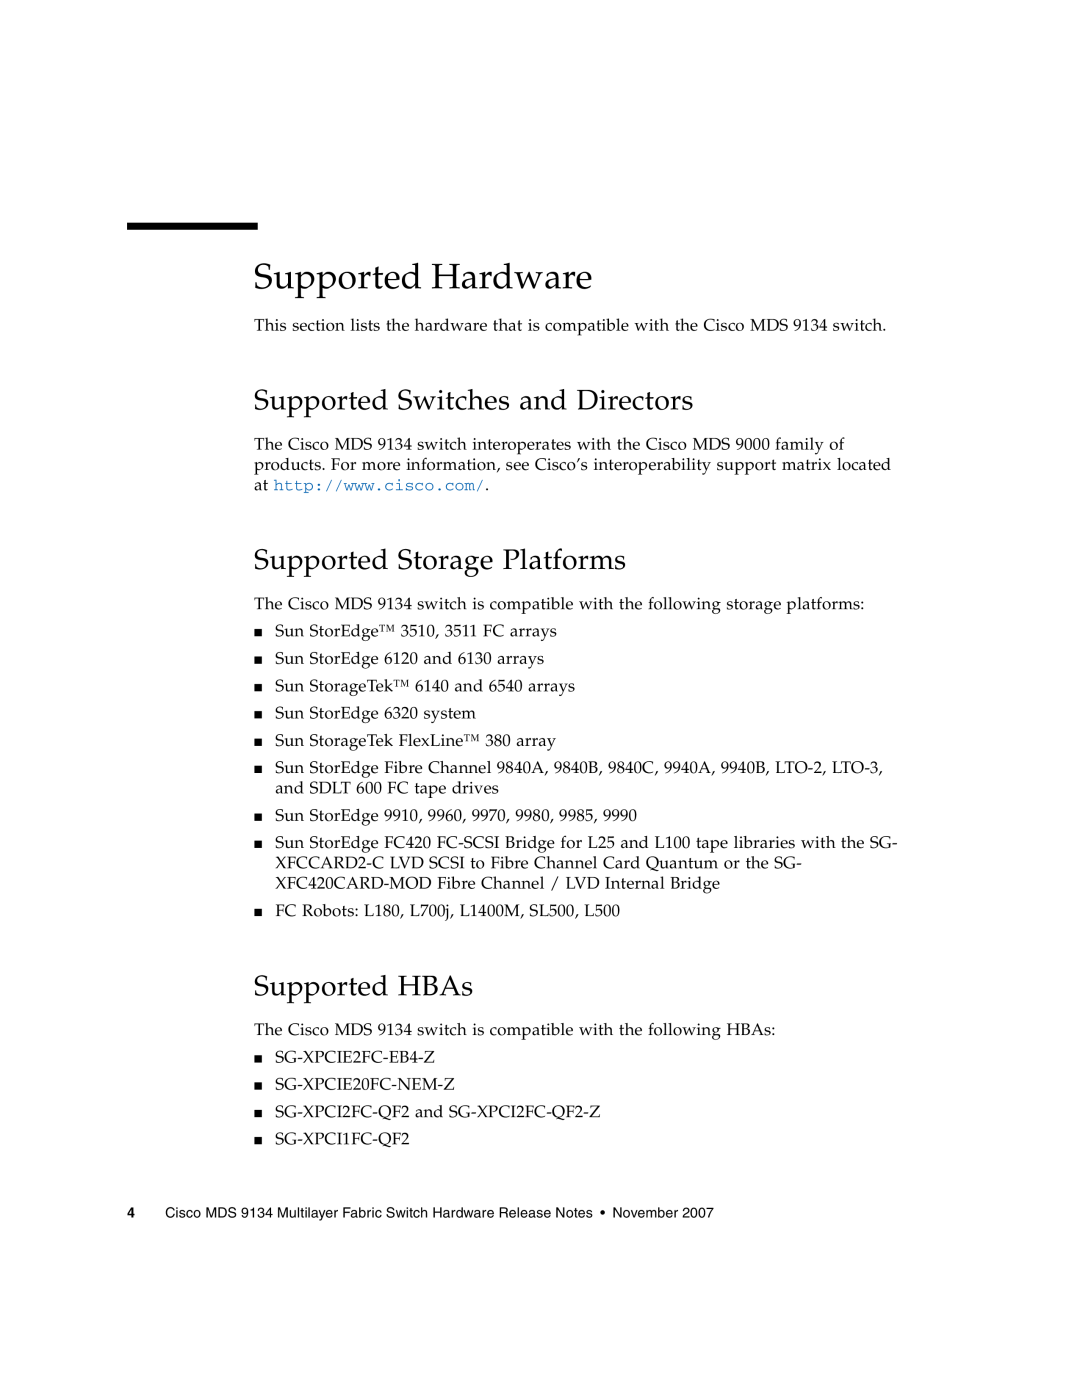 Sun Microsystems MDS 9134 manual Supported Hardware, Supported Switches and Directors, Supported Storage Platforms 